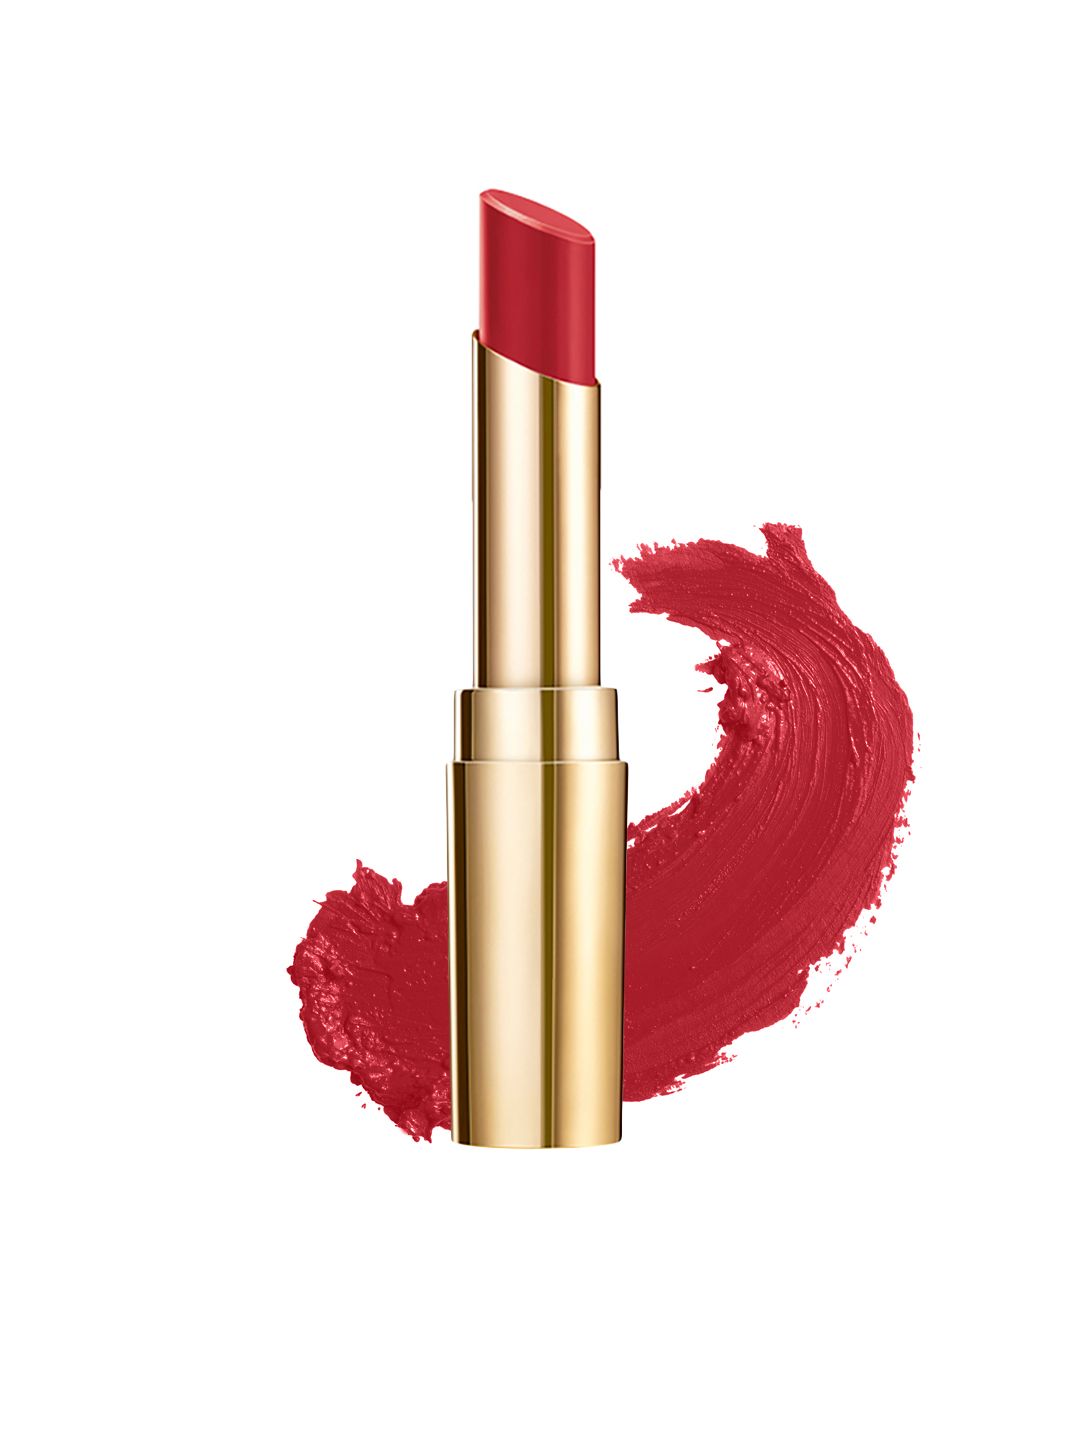 Lakme Absolute Matte Ultimate Lip Color - Rouge Splash 3.4gm Price in India